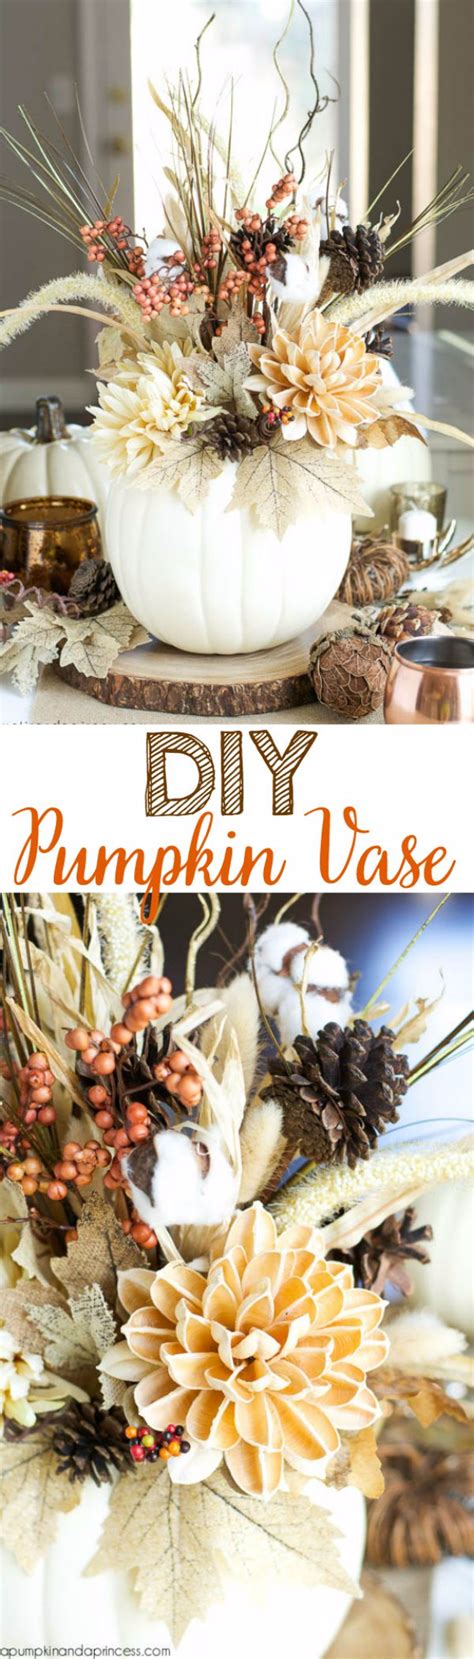 Share your diy home decorating ideas & inspiration! 17 Wonderful DIY Home Decor Ideas For This Fall